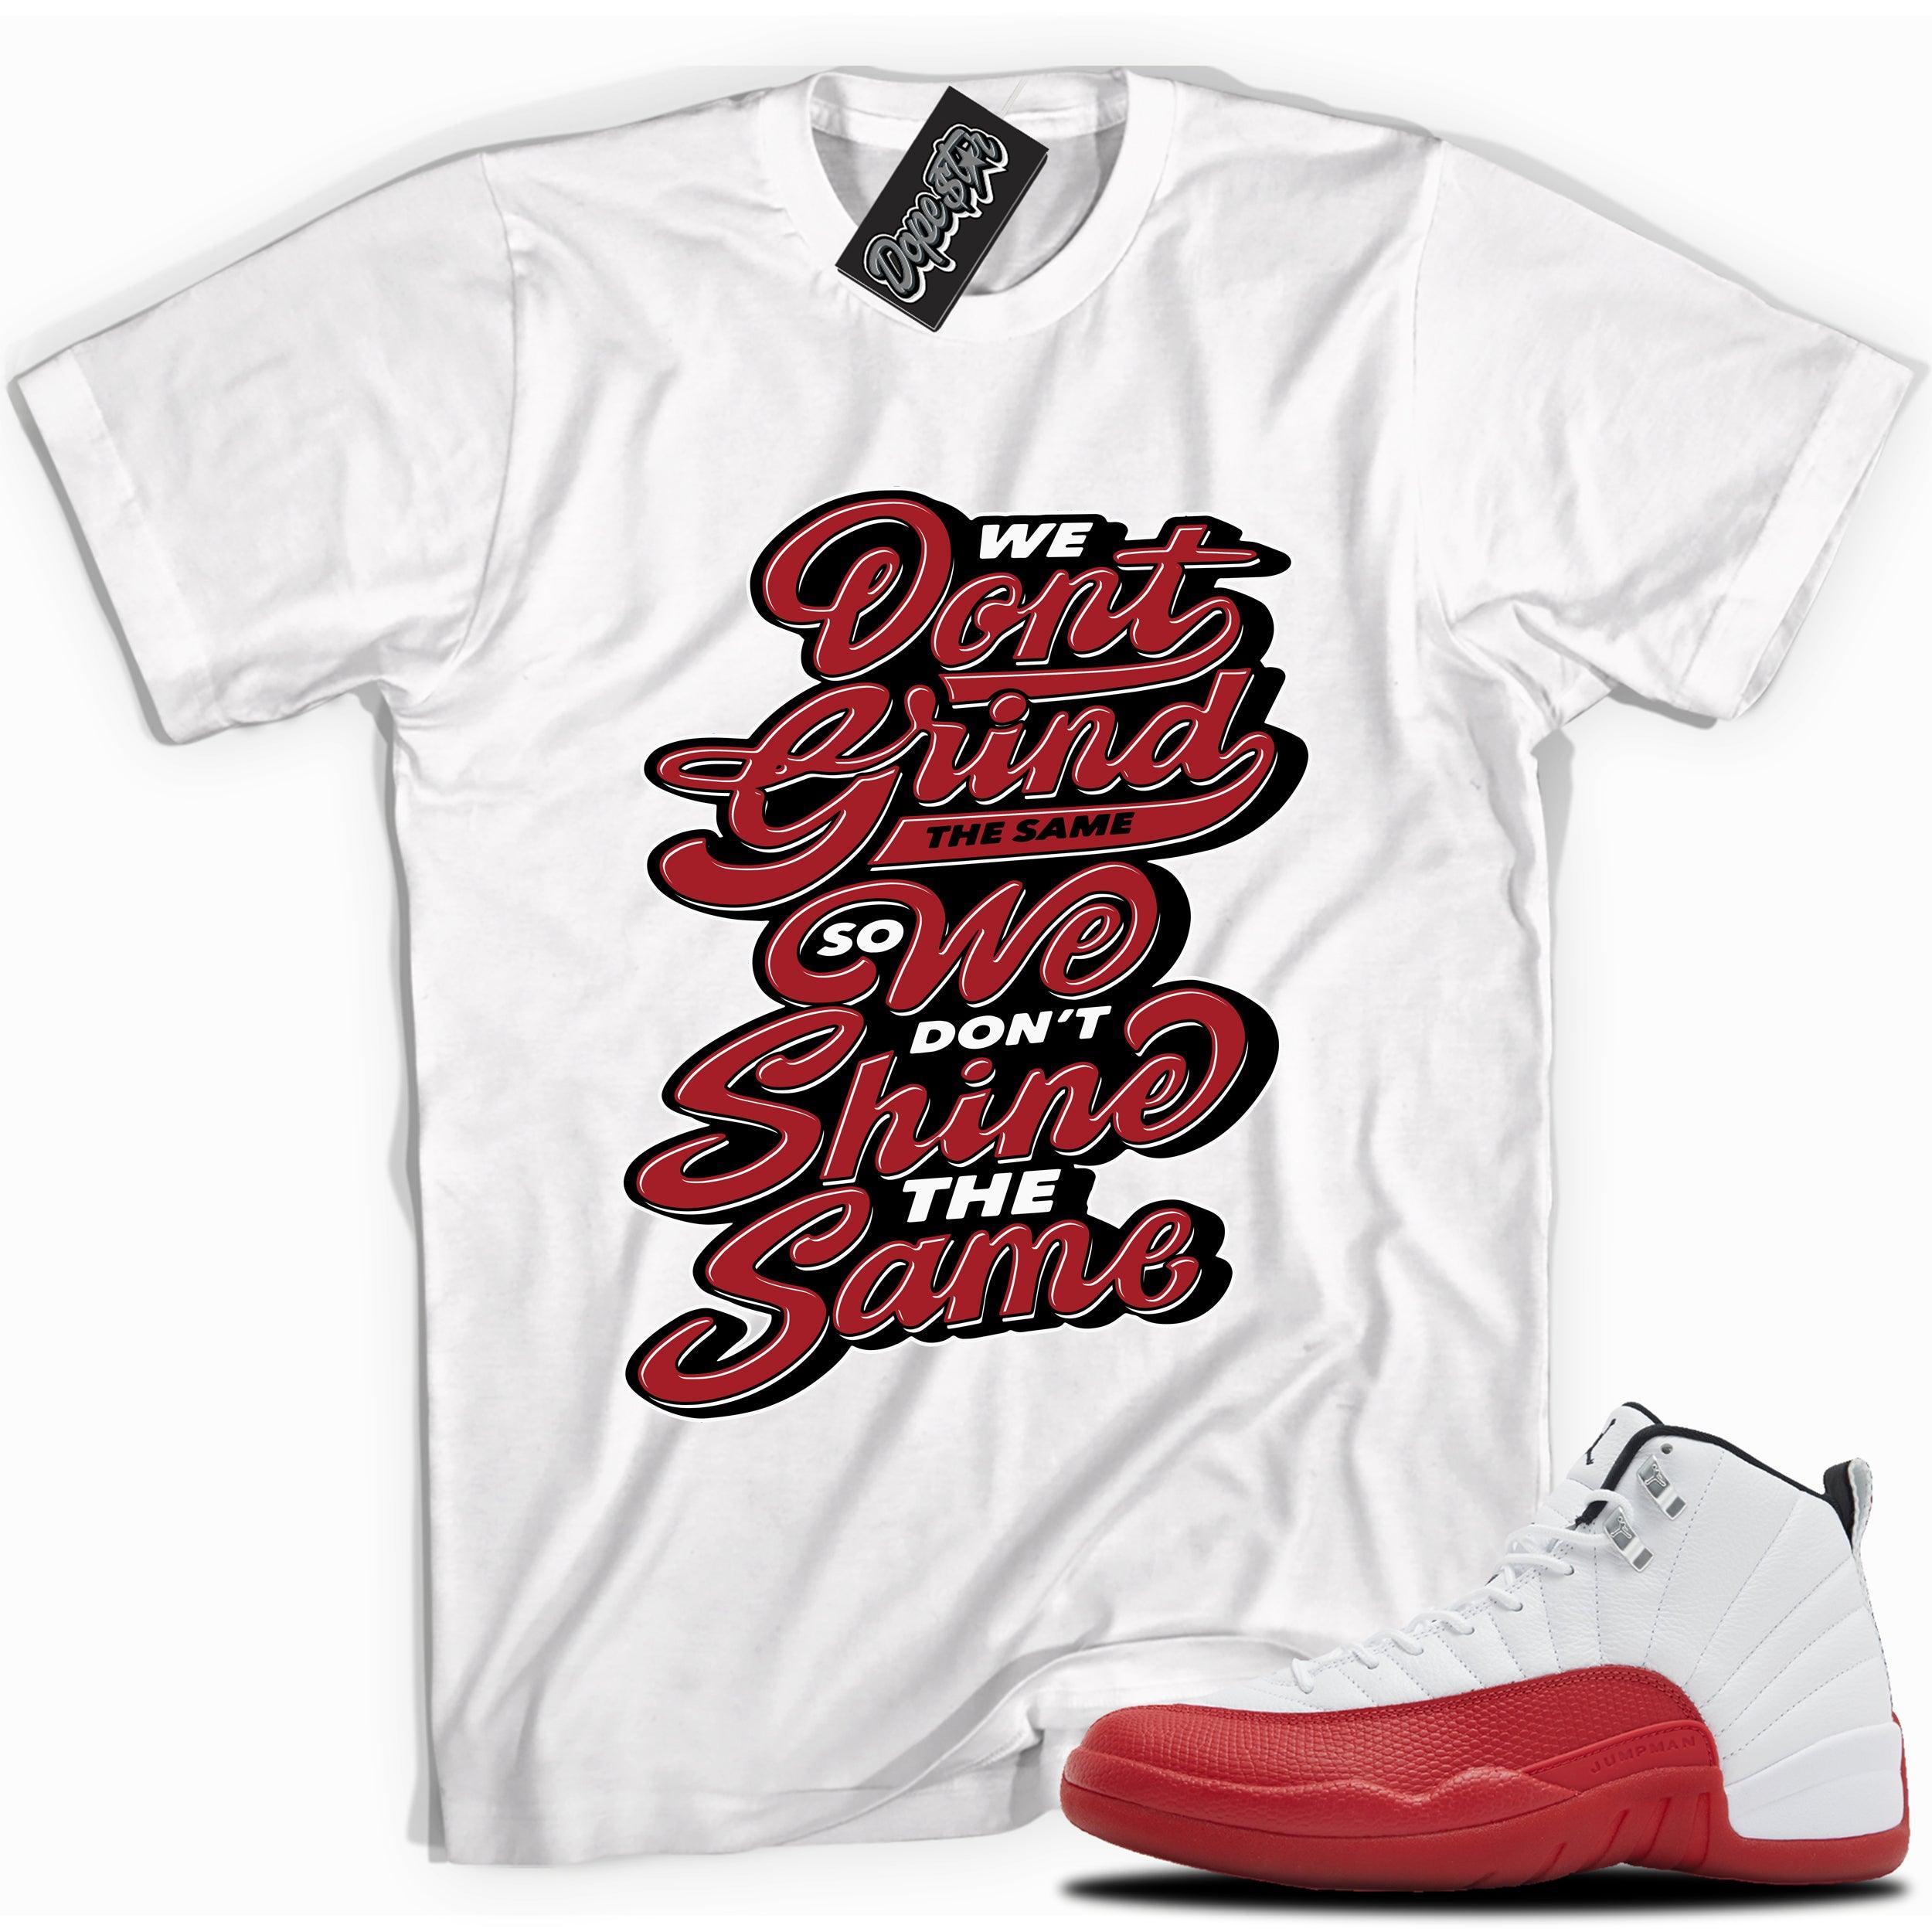 Cool White graphic tee with “ Grind Shine ” print, that perfectly matches Air Jordan 12 Retro Cherry Red 2023 red and white sneakers